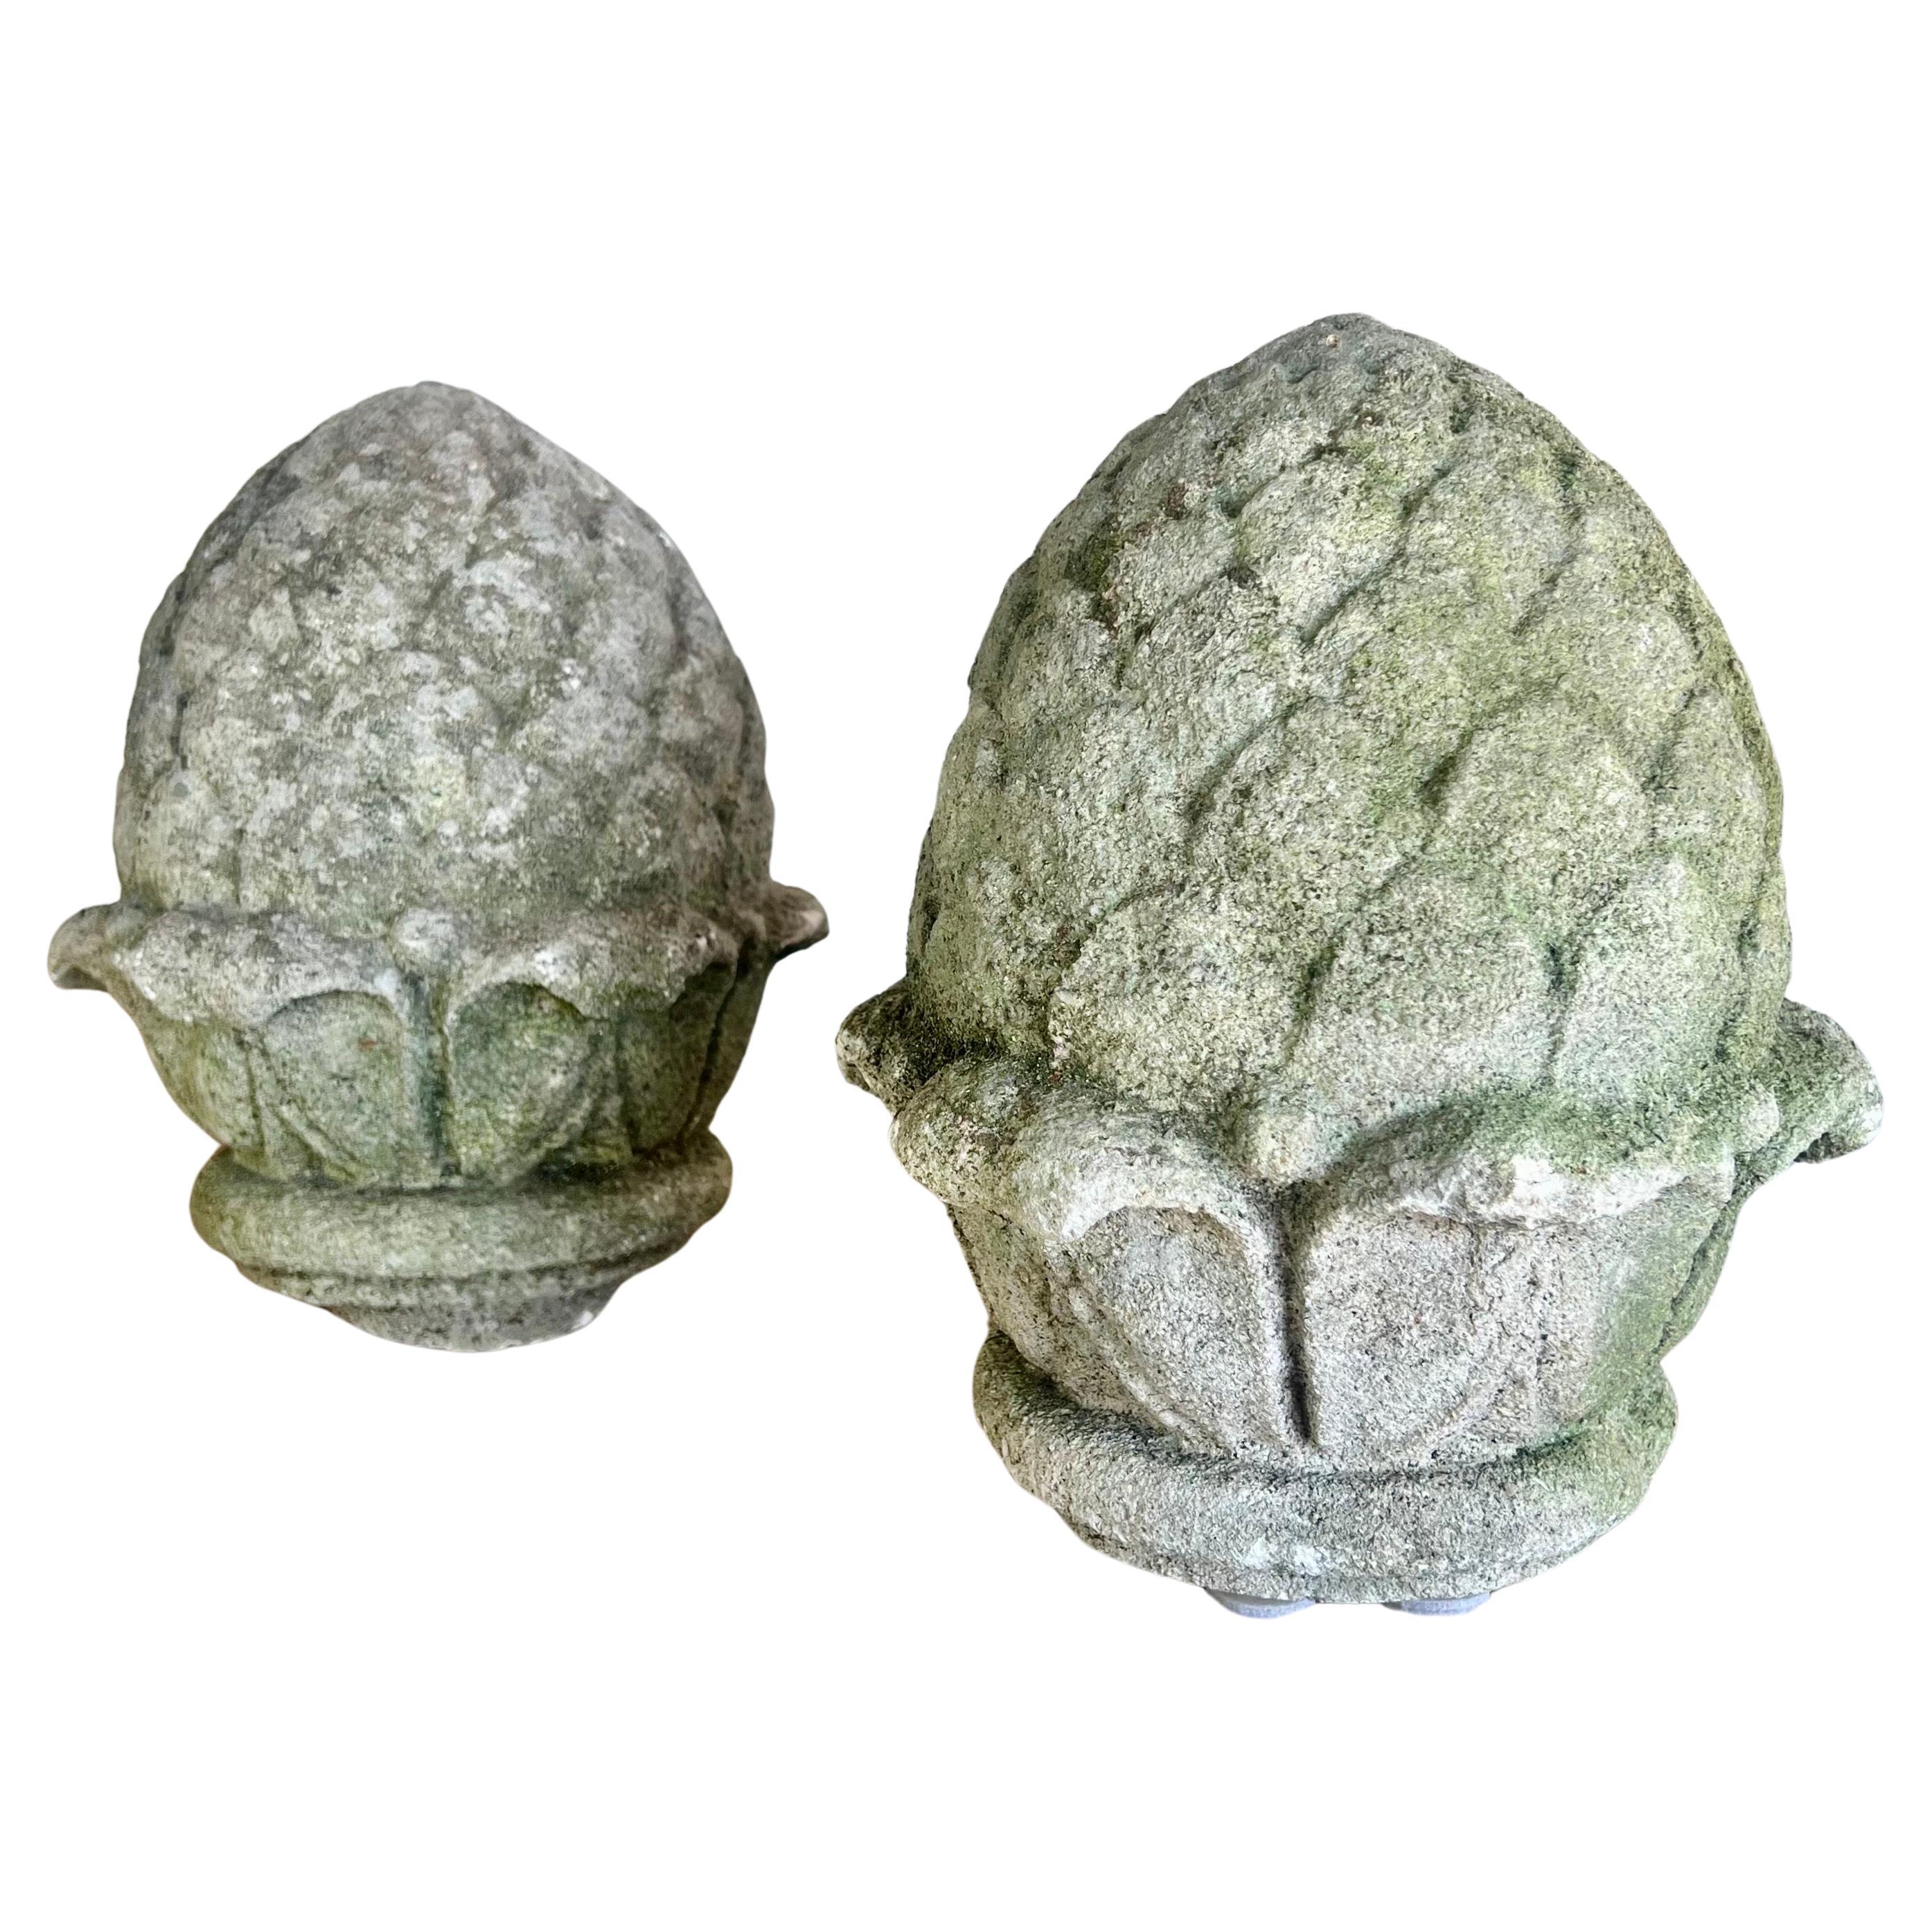 A pair of neoclassical Italian-style cement artichokes with a moss patina.  The moss patina adds a touch of antiquity and natural grace, suggesting age and blending seamlessly with garden environments or adding a rustic touch to more modern